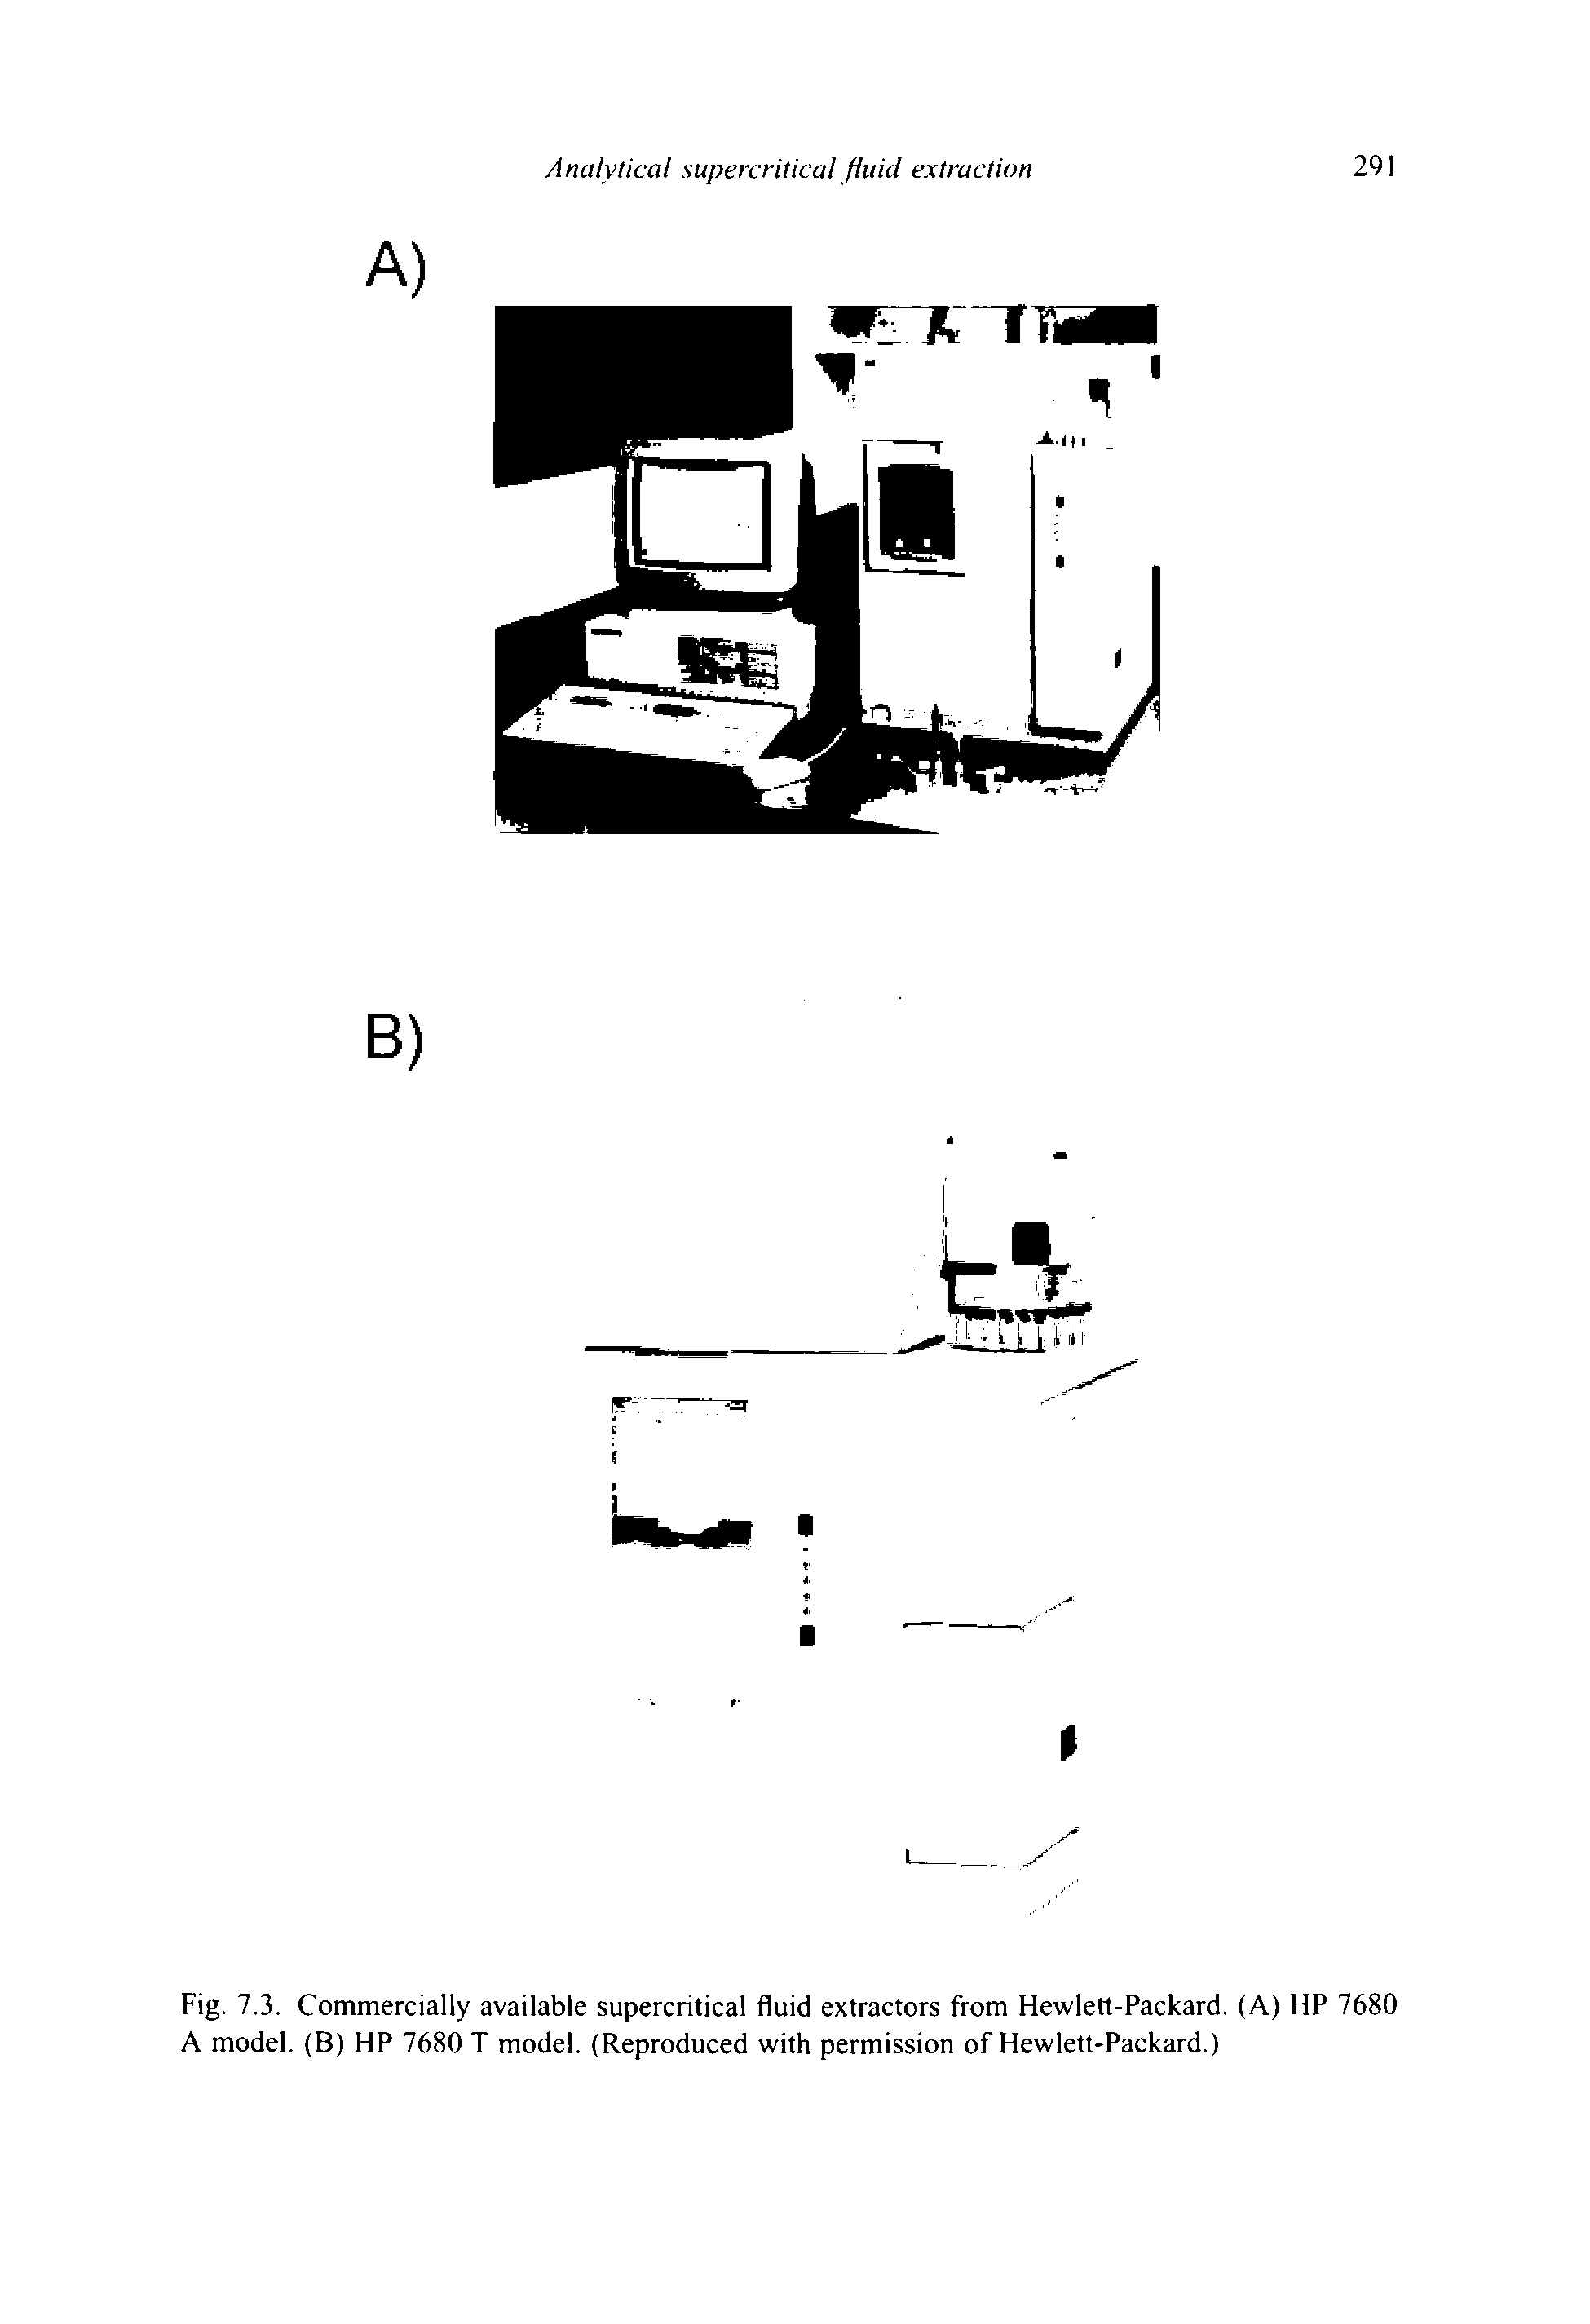 Fig. 7.3. Commercially available supercritical fluid extractors from Hewlett-Packard. (A) HP 7680 A model. (B) HP 7680 T model. (Reproduced with permission of Hewlett-Packard.)...